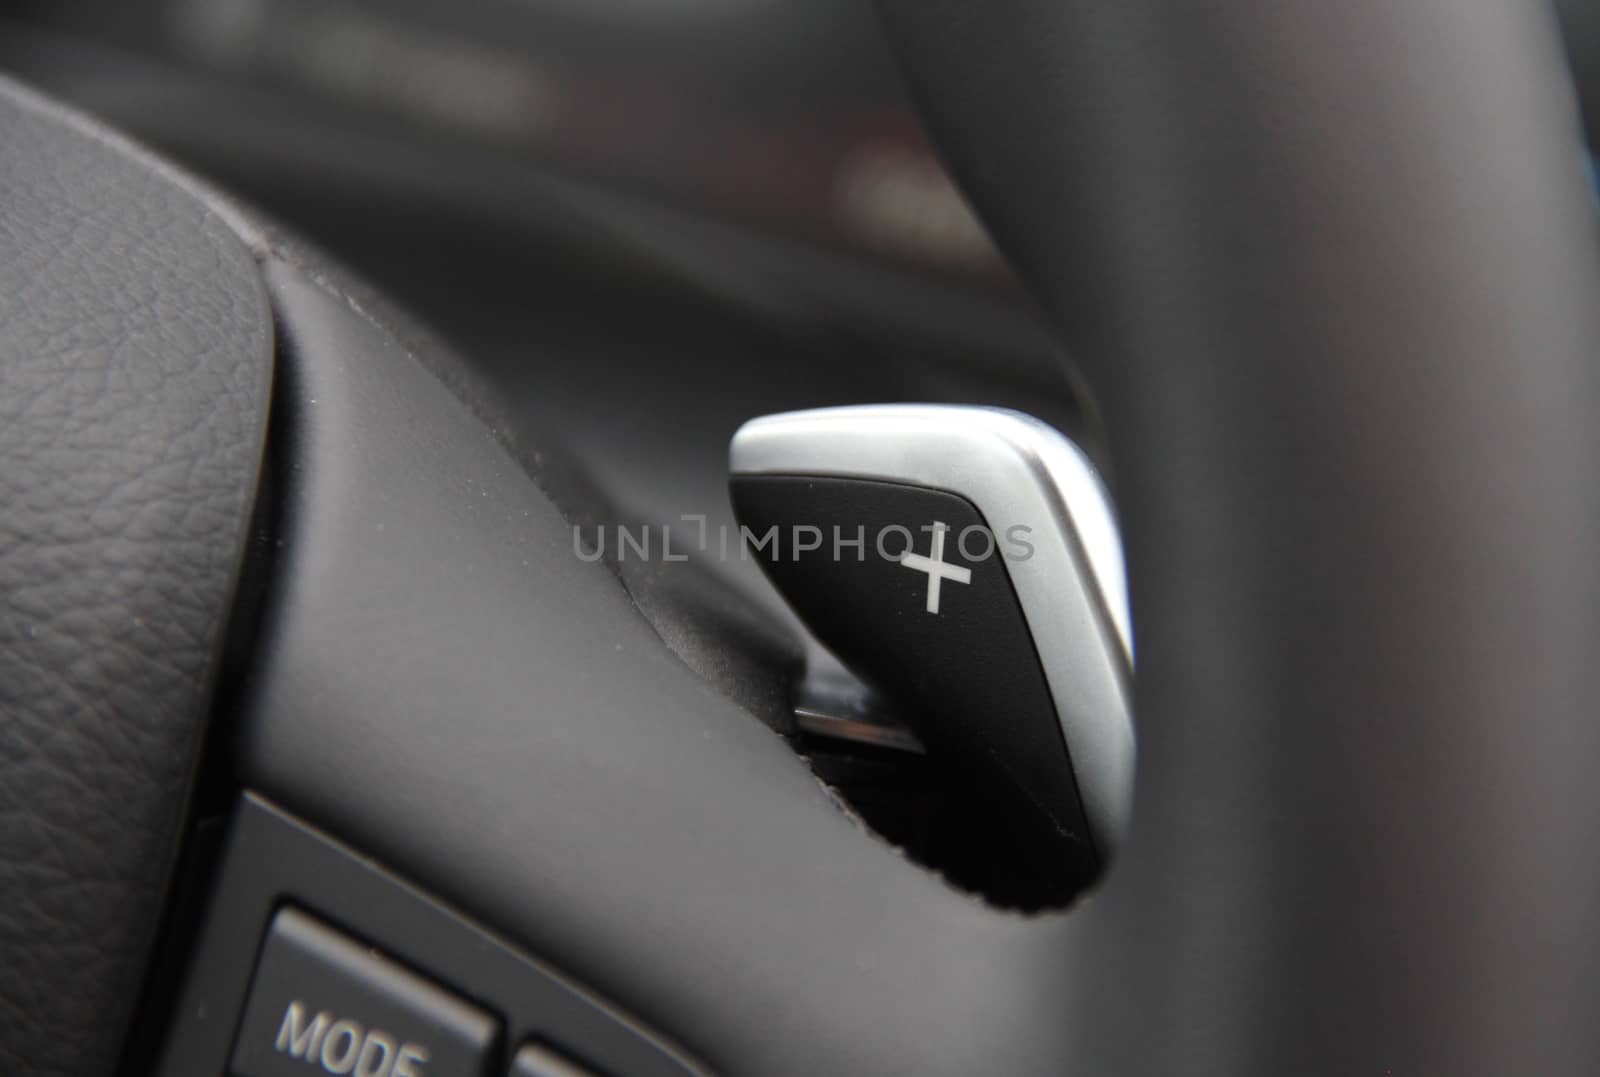 manual gear changing stick on a car's steering wheel, car interior detail